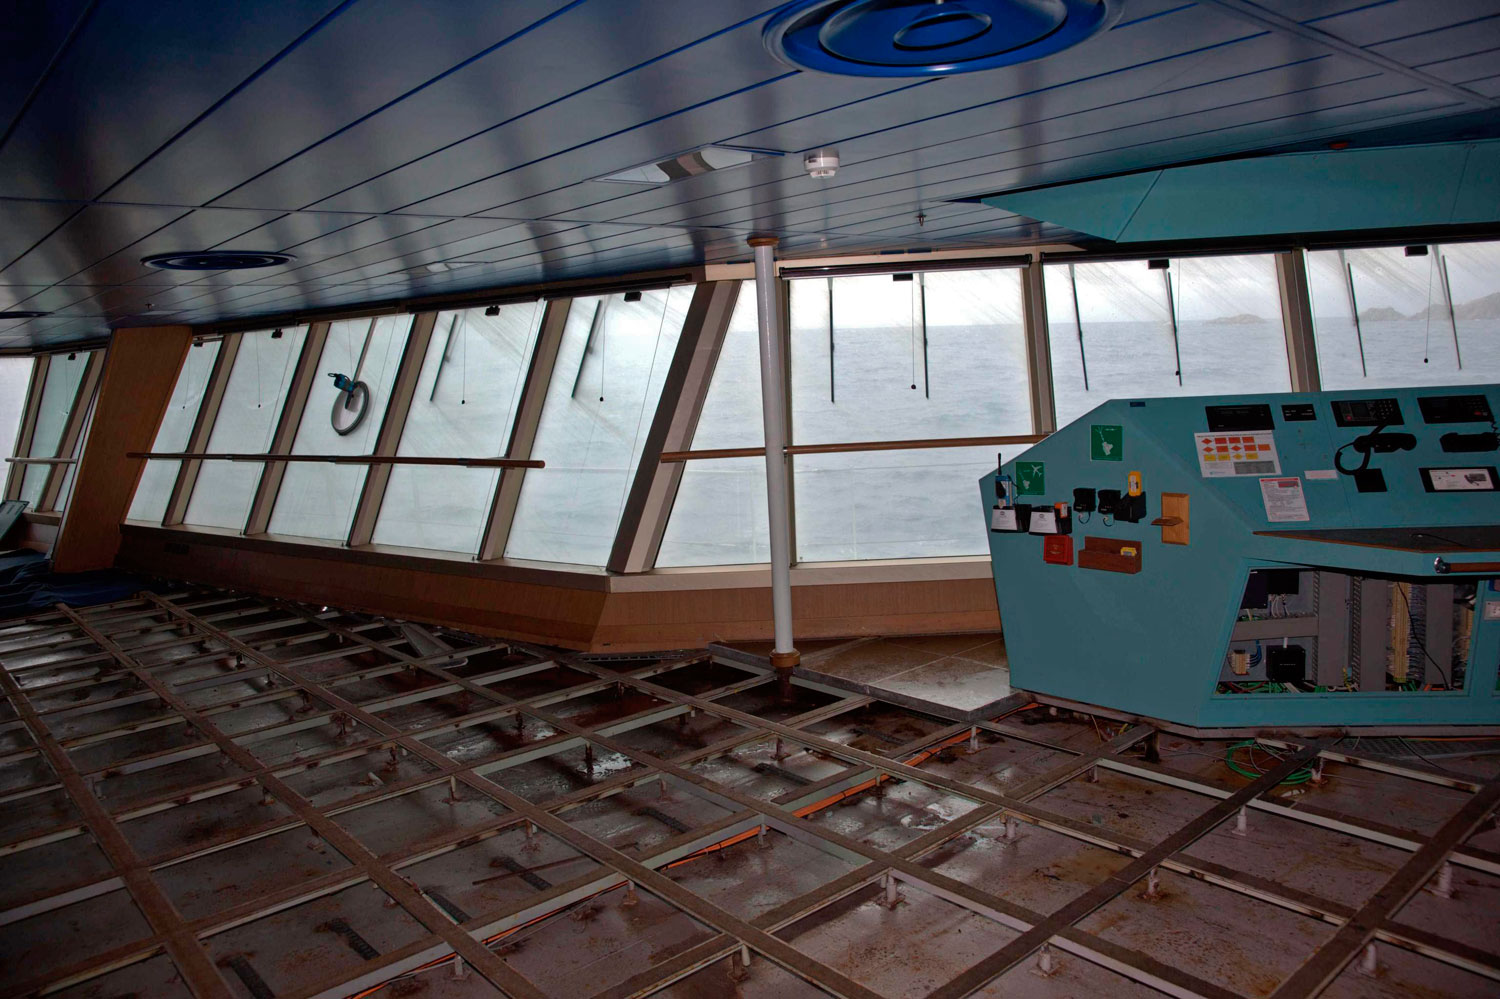 A detail in the interior of Costa Concordia cruise ship wreck off coast Giglio island, Italy on 21 July 2014. All floors of the ship were cleaned to prevent toxic chemicals from spilling into the water.